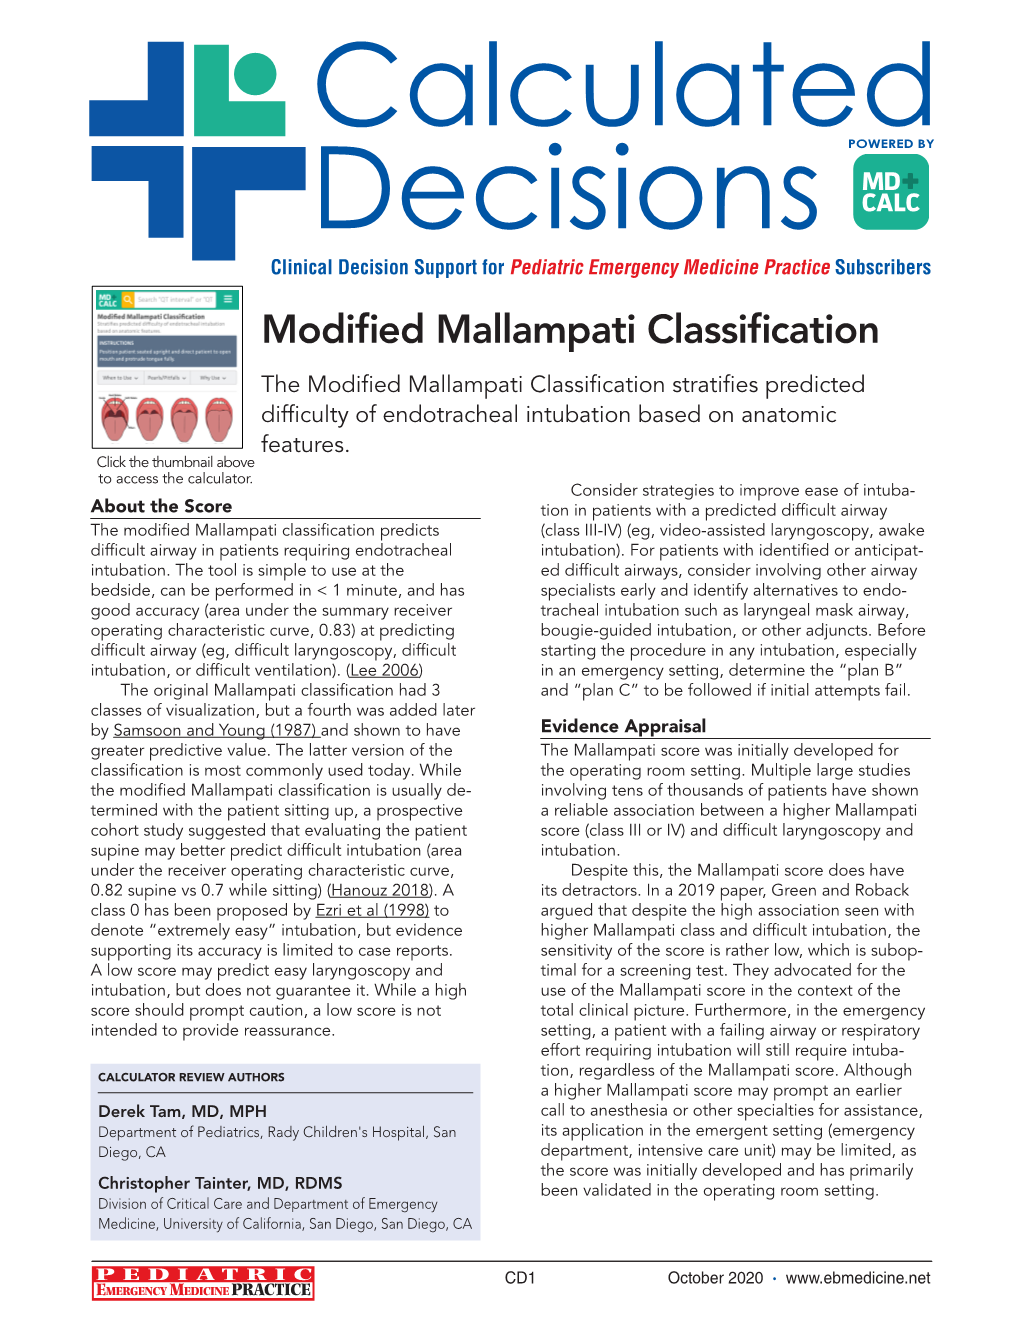 Modified Mallampati Classification the Modified Mallampati Classification Stratifies Predicted Difficulty of Endotracheal Intubation Based on Anatomic Features